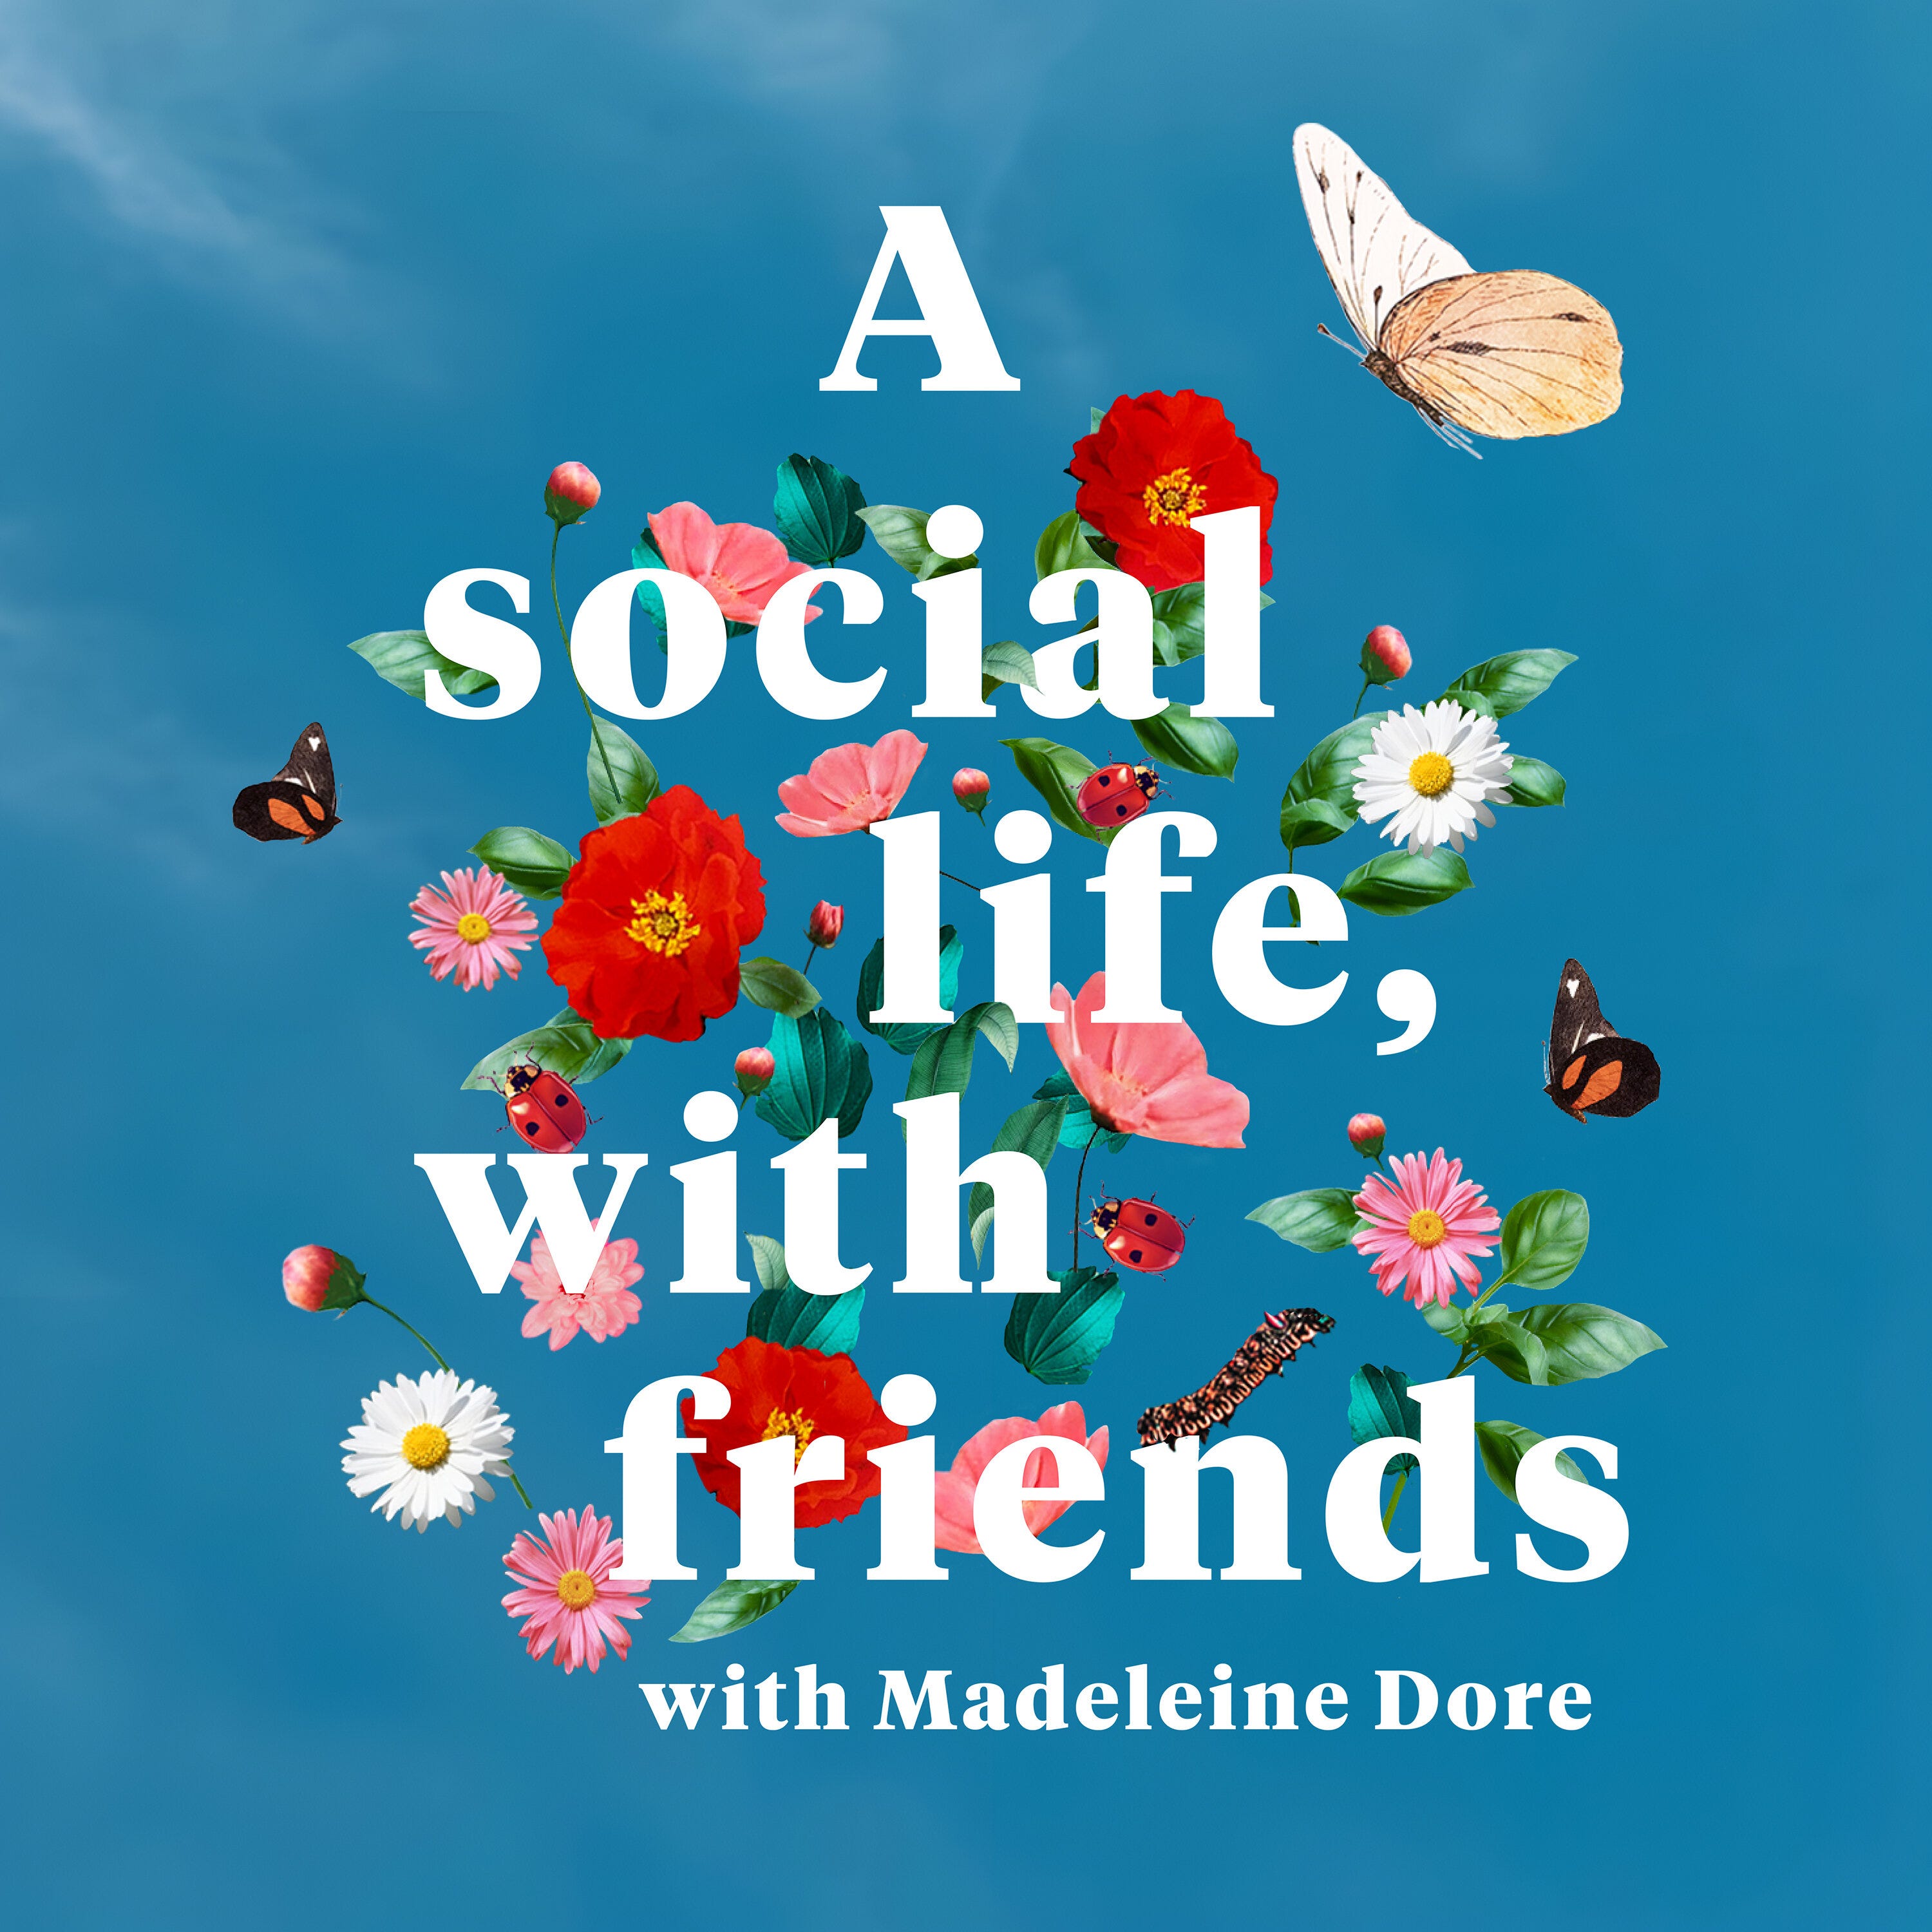 Coming soon: A social life, with friends